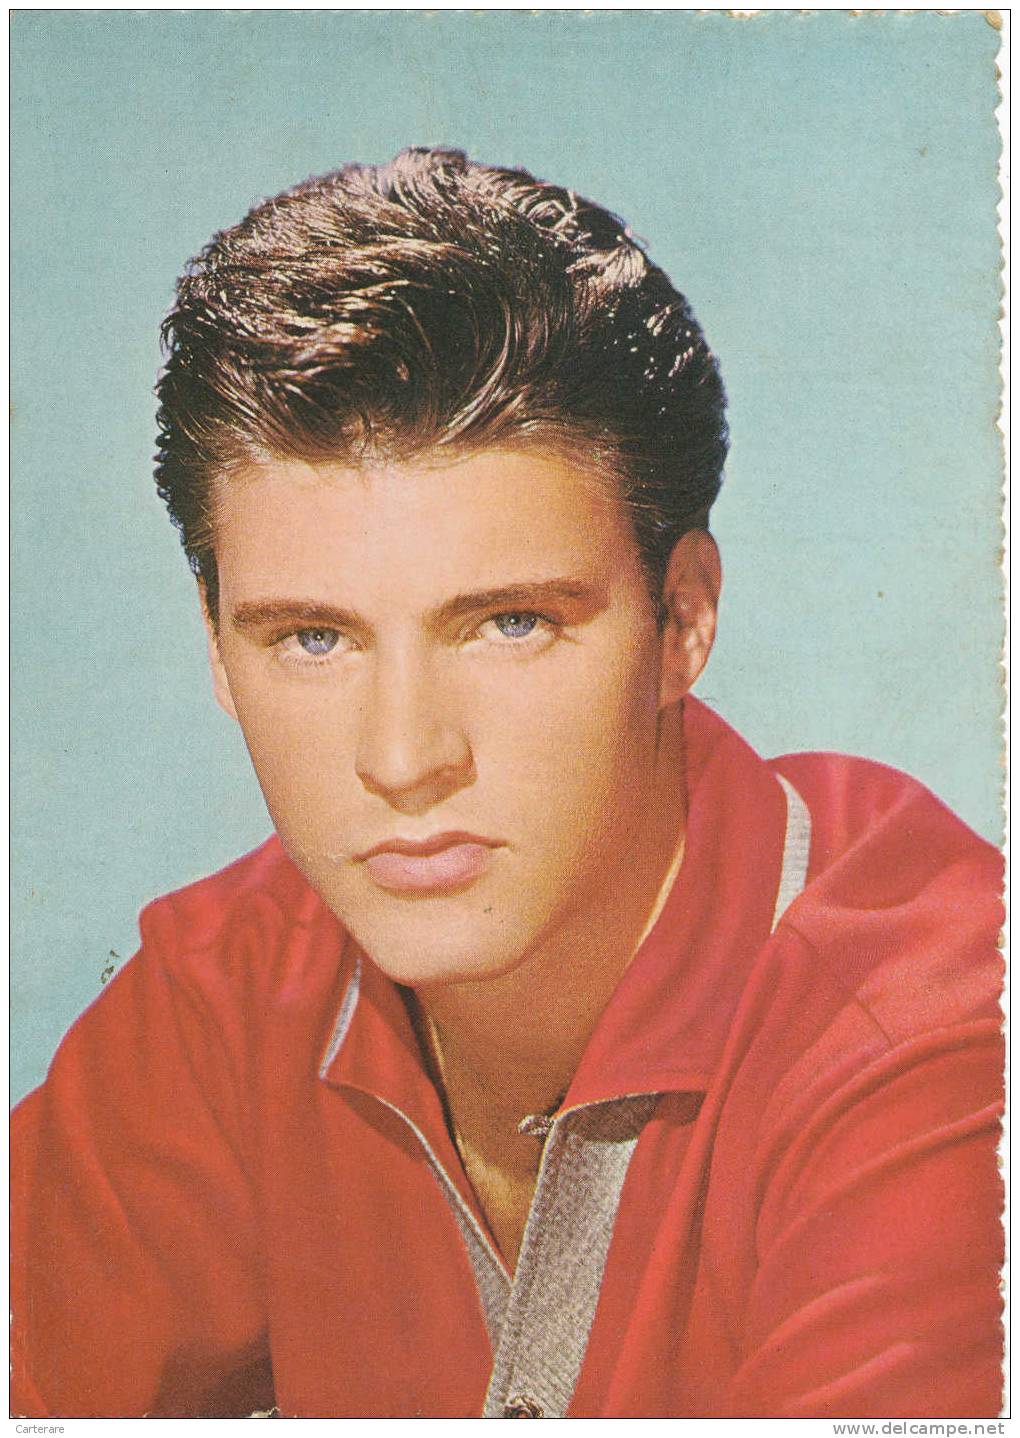 images-of-ricky-nelson